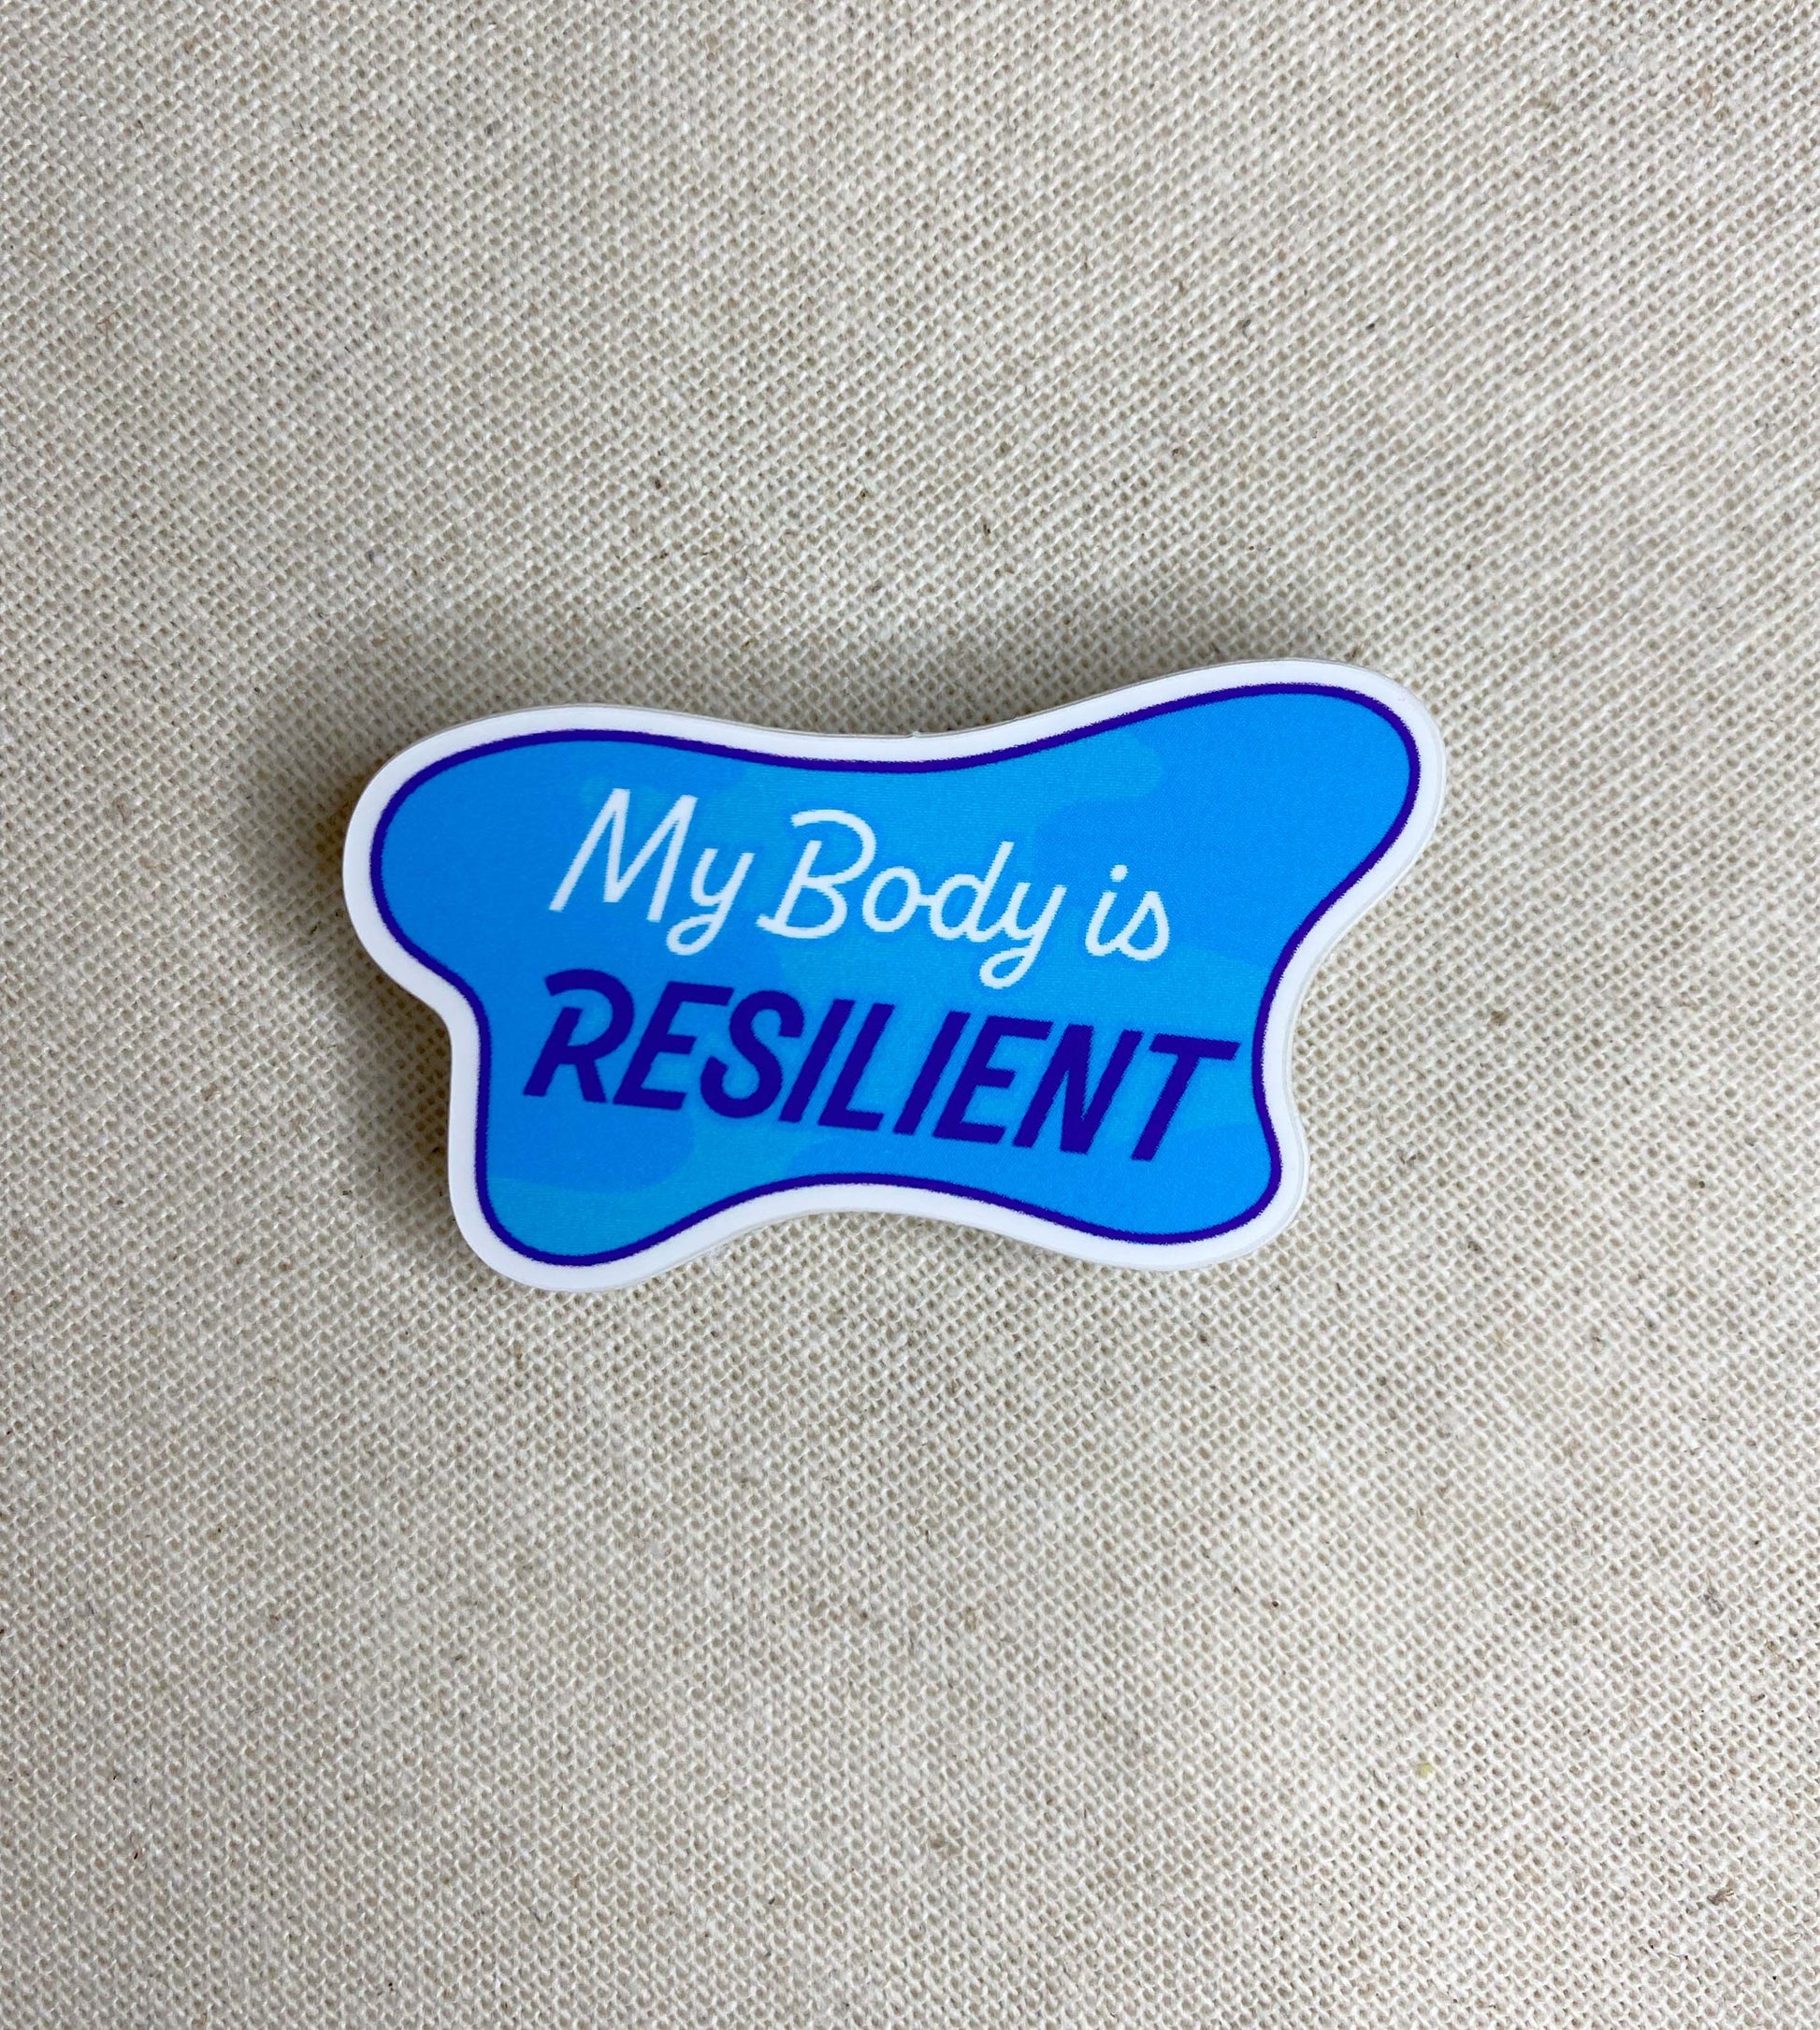 Resilient Body high quality die cut vinyl waterproof and scratch resistant sticker from Goods Made By Digitrillnana. Perfect for laptops, water bottles, phone cases, luggage, journals, and more! Black Woman Owned.